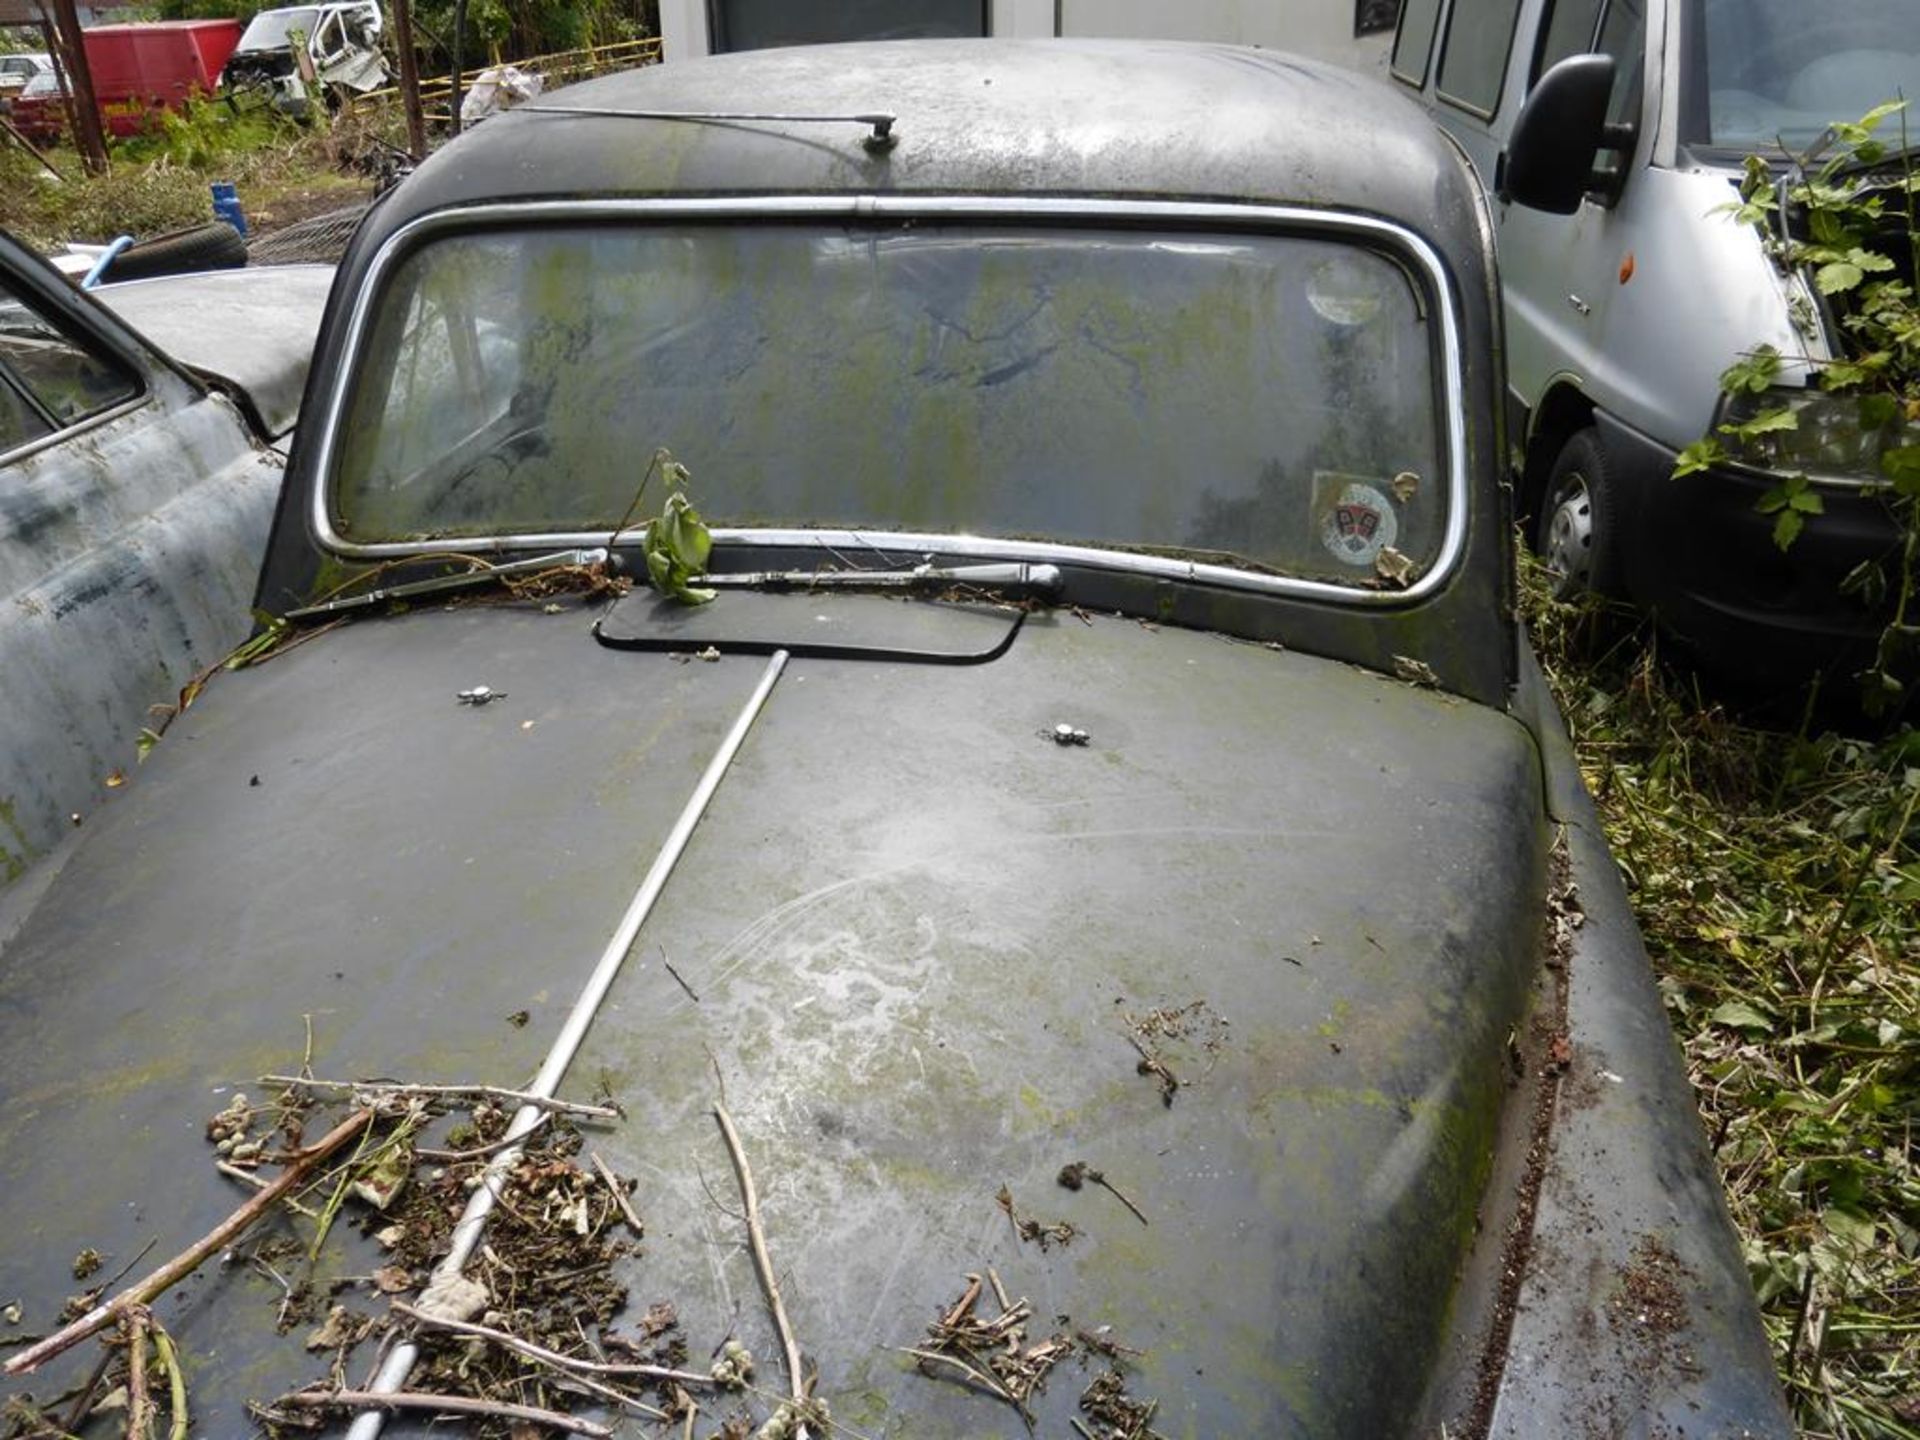 A Rover P4 (in need of restoration) - Image 3 of 15